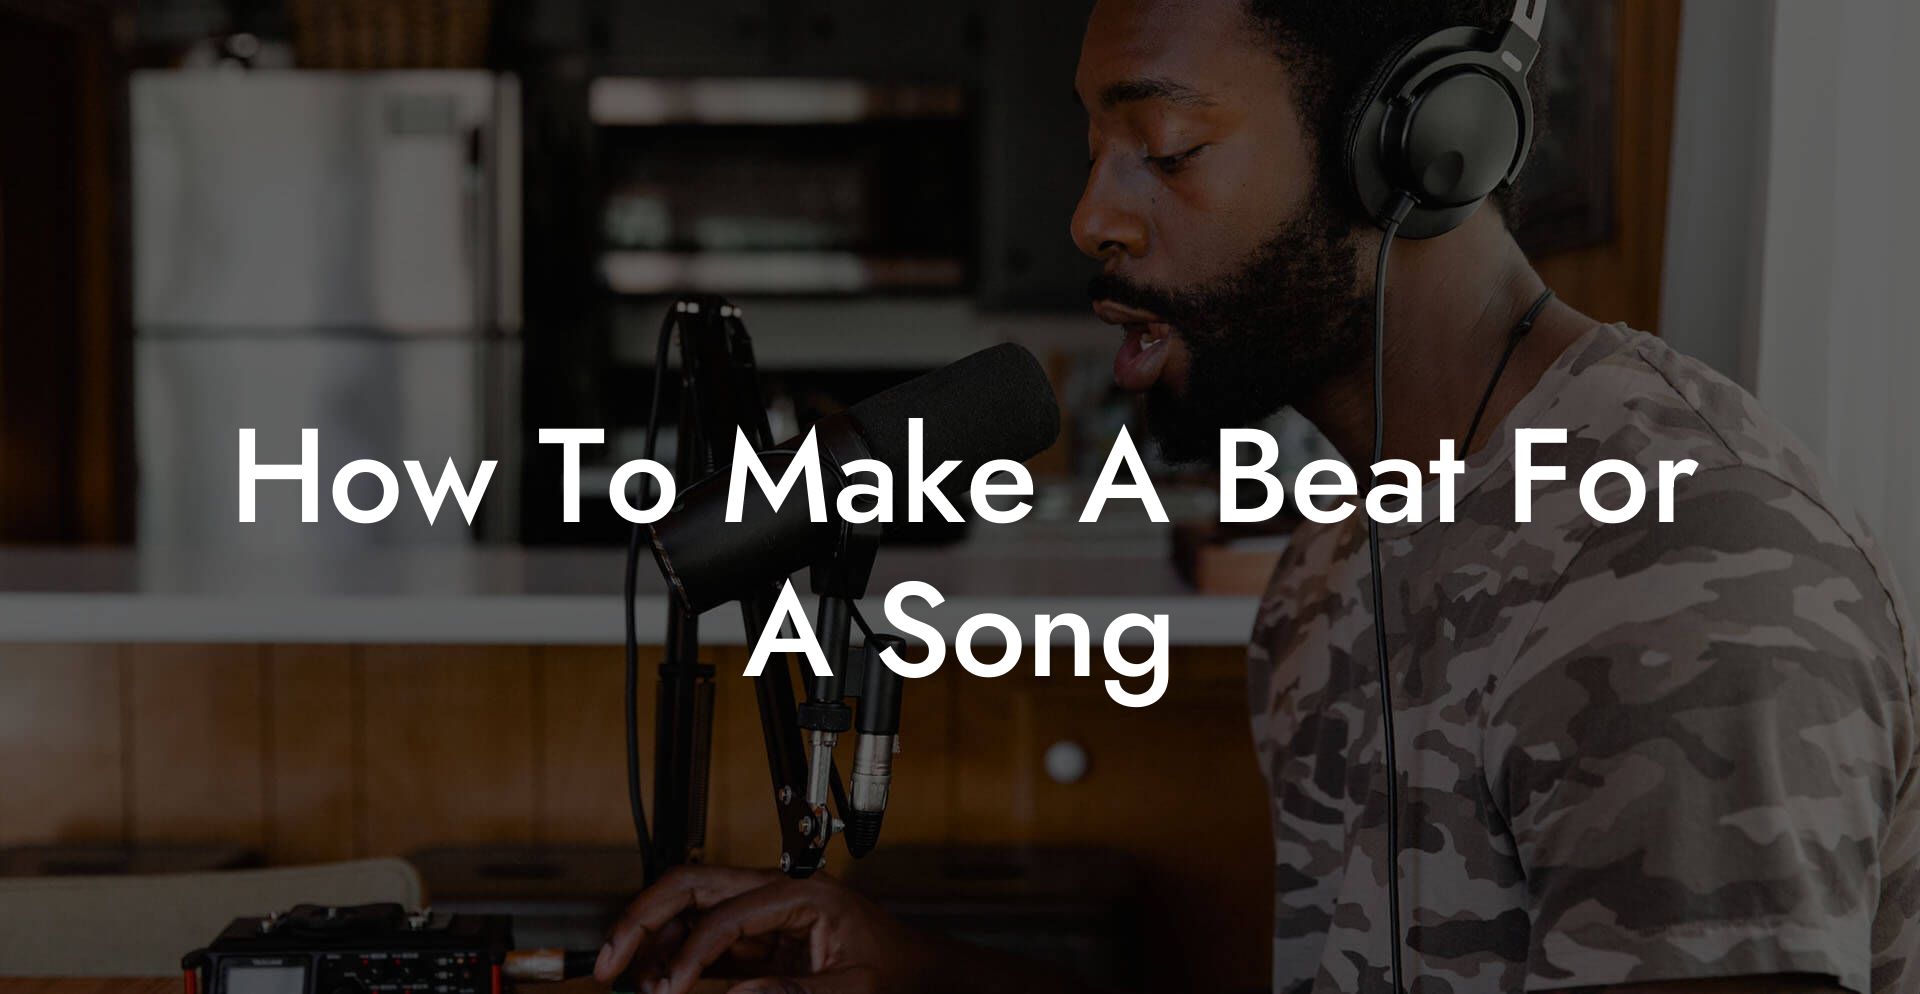 how to make a beat for a song lyric assistant